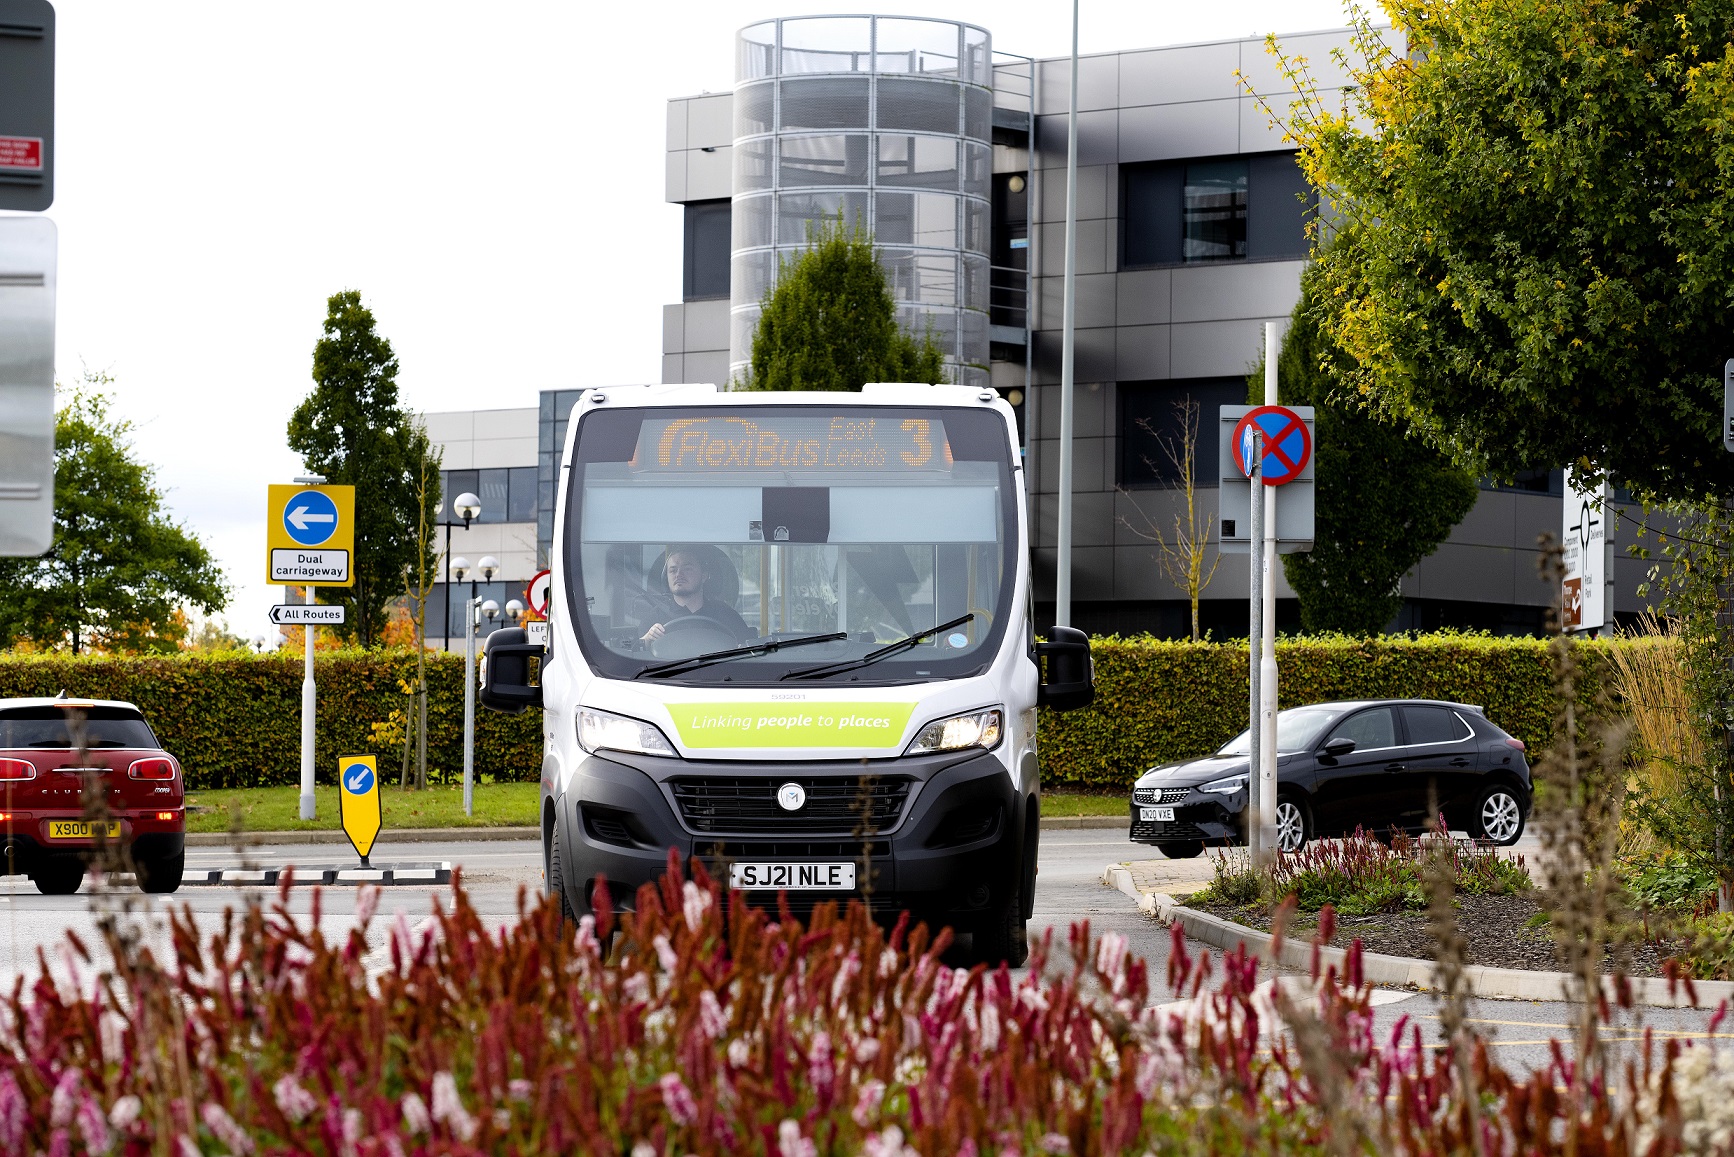 East Leeds Flexibus trial proposed for early termination